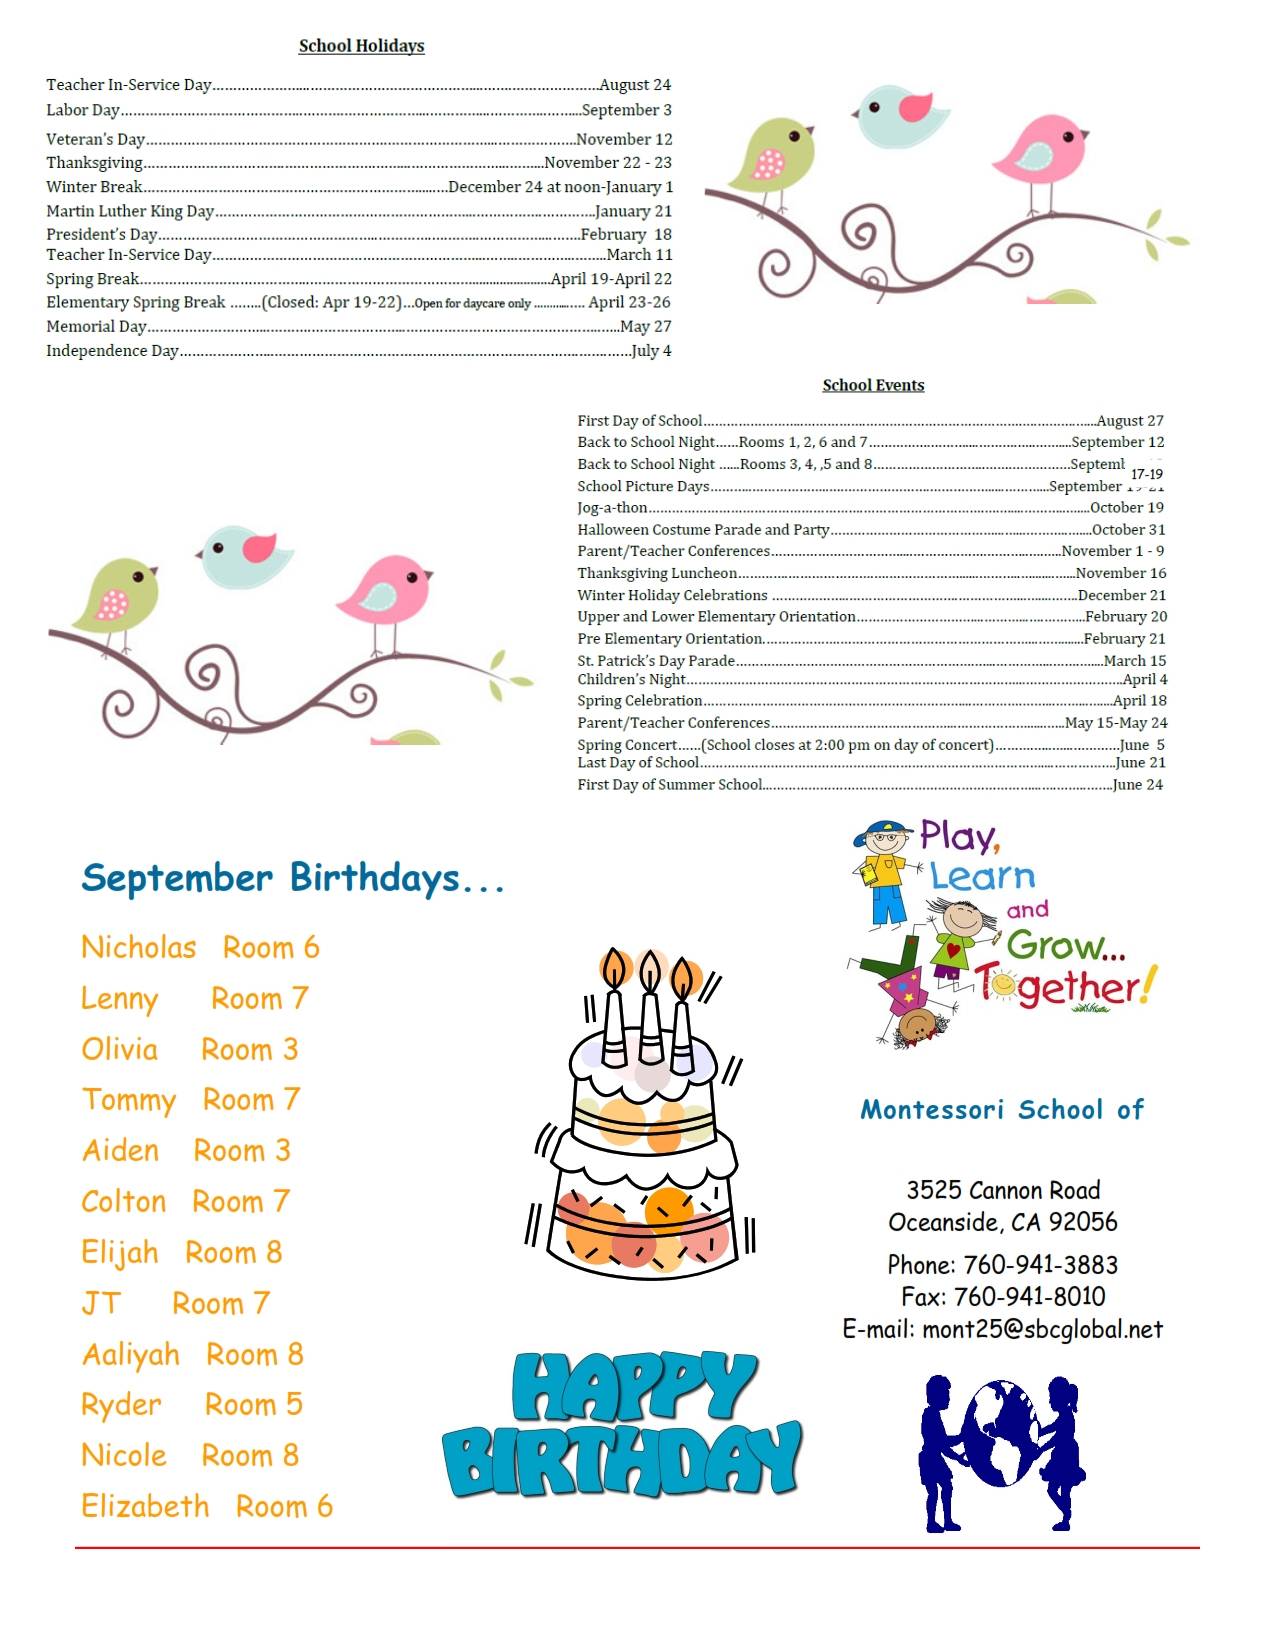 MSO September 2018 Newsletter. School Holidays and School Events